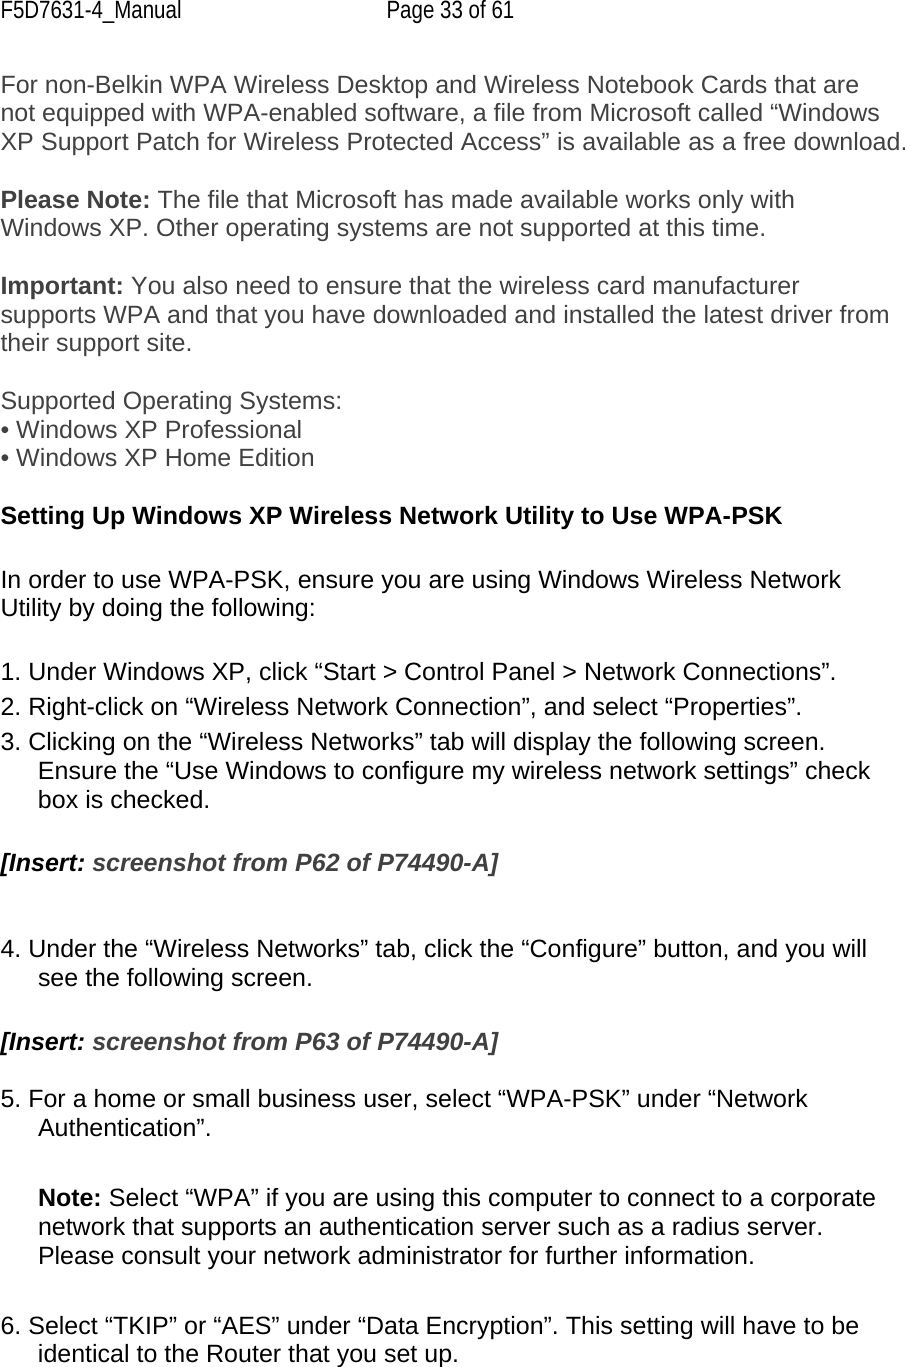 F5D7631-4_Manual  Page 33 of 61 For non-Belkin WPA Wireless Desktop and Wireless Notebook Cards that are not equipped with WPA-enabled software, a file from Microsoft called “Windows XP Support Patch for Wireless Protected Access” is available as a free download.   Please Note: The file that Microsoft has made available works only with Windows XP. Other operating systems are not supported at this time.   Important: You also need to ensure that the wireless card manufacturer supports WPA and that you have downloaded and installed the latest driver from their support site.  Supported Operating Systems:  • Windows XP Professional • Windows XP Home Edition  Setting Up Windows XP Wireless Network Utility to Use WPA-PSK  In order to use WPA-PSK, ensure you are using Windows Wireless Network Utility by doing the following:  1. Under Windows XP, click “Start &gt; Control Panel &gt; Network Connections”. 2. Right-click on “Wireless Network Connection”, and select “Properties”. 3. Clicking on the “Wireless Networks” tab will display the following screen. Ensure the “Use Windows to configure my wireless network settings” check box is checked.  [Insert: screenshot from P62 of P74490-A]   4. Under the “Wireless Networks” tab, click the “Configure” button, and you will see the following screen.  [Insert: screenshot from P63 of P74490-A]  5. For a home or small business user, select “WPA-PSK” under “Network Authentication”.   Note: Select “WPA” if you are using this computer to connect to a corporate network that supports an authentication server such as a radius server. Please consult your network administrator for further information.  6. Select “TKIP” or “AES” under “Data Encryption”. This setting will have to be identical to the Router that you set up.  